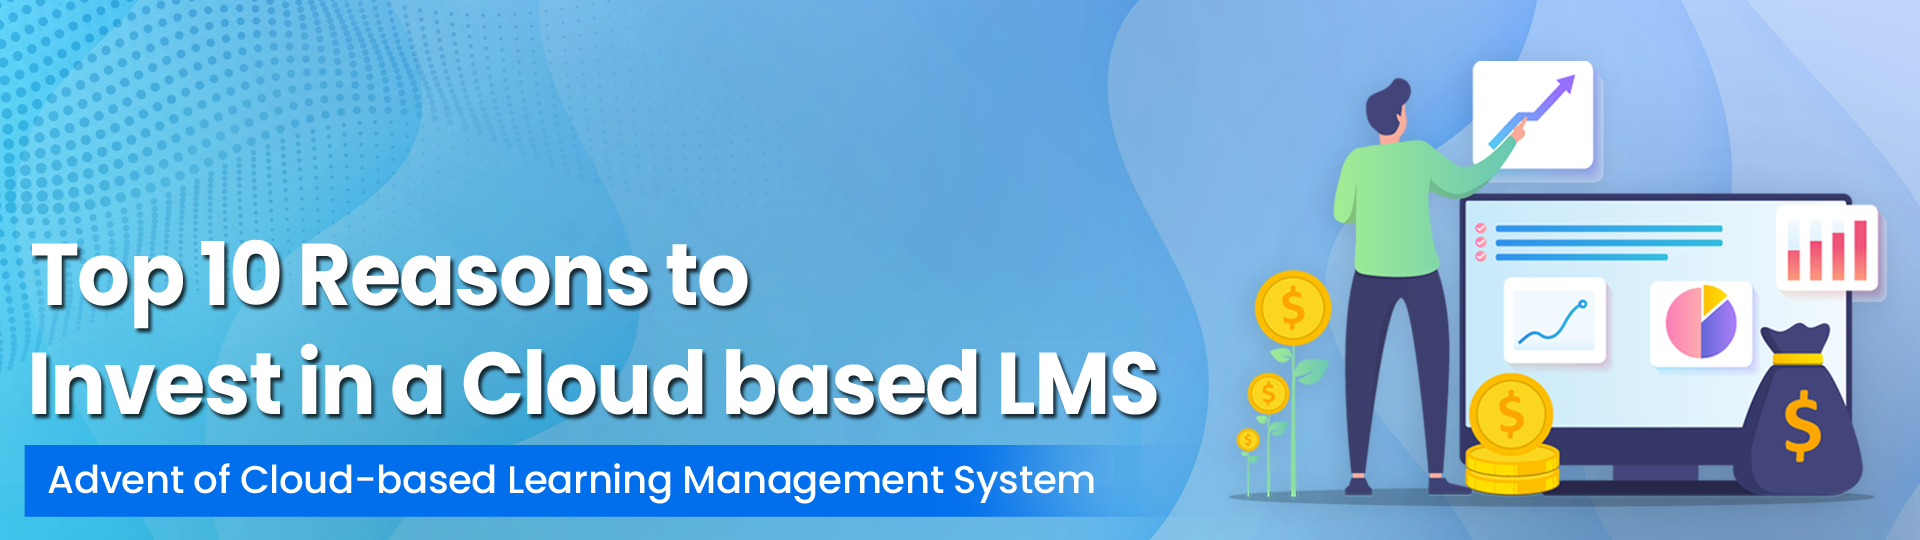 Top 10 Reasons to Invest in a Cloud based LMS - Paradiso Solutions